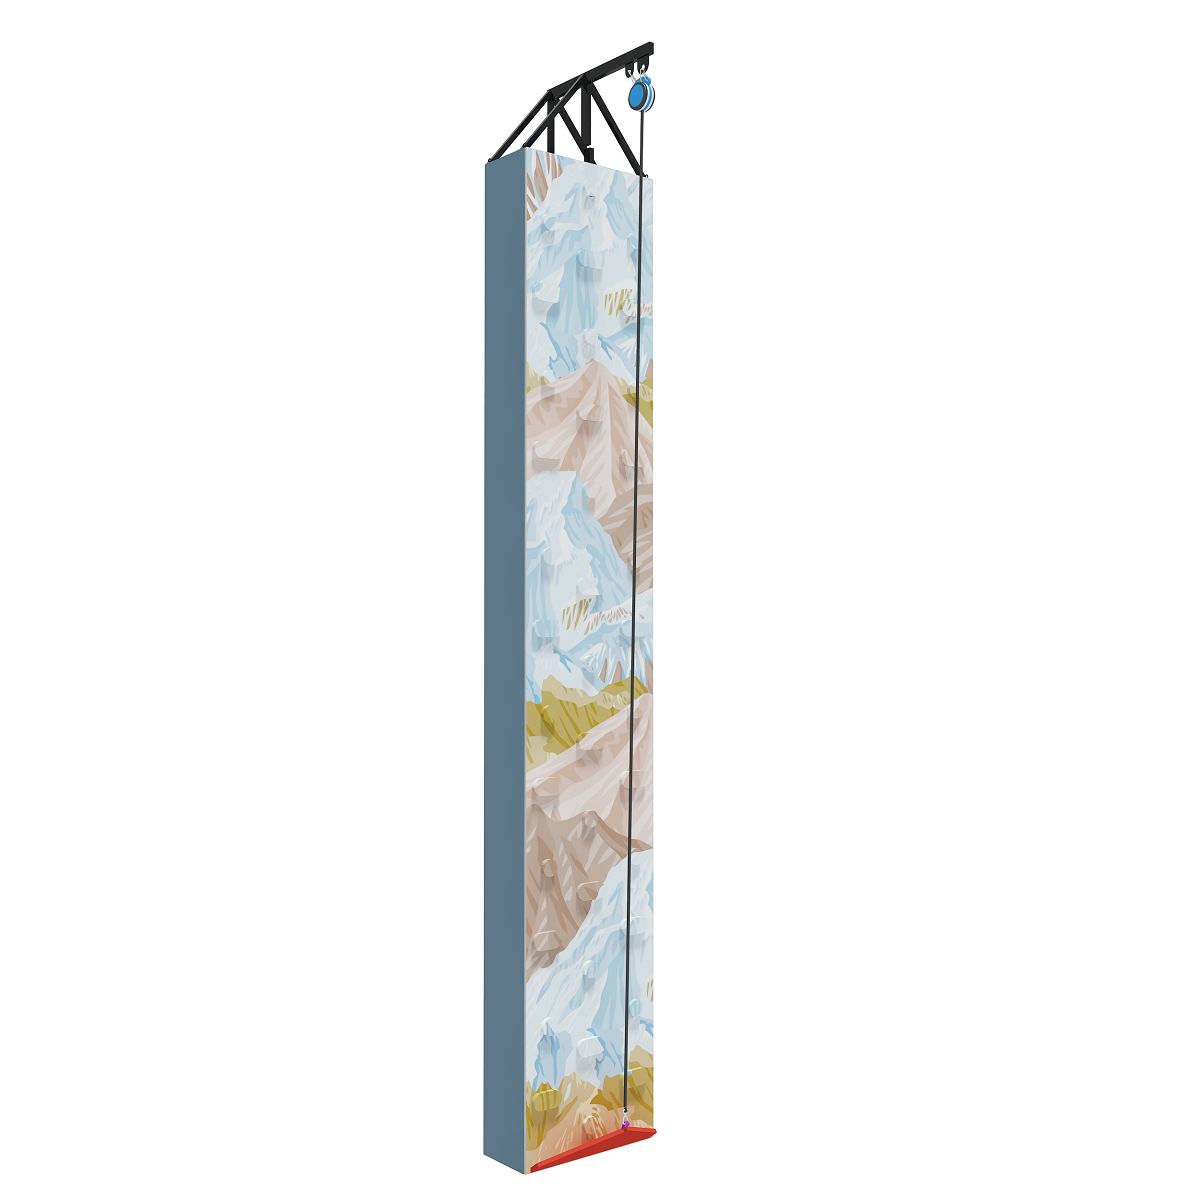 Frame Climbing Wall For Toddlers With Stainless Steel